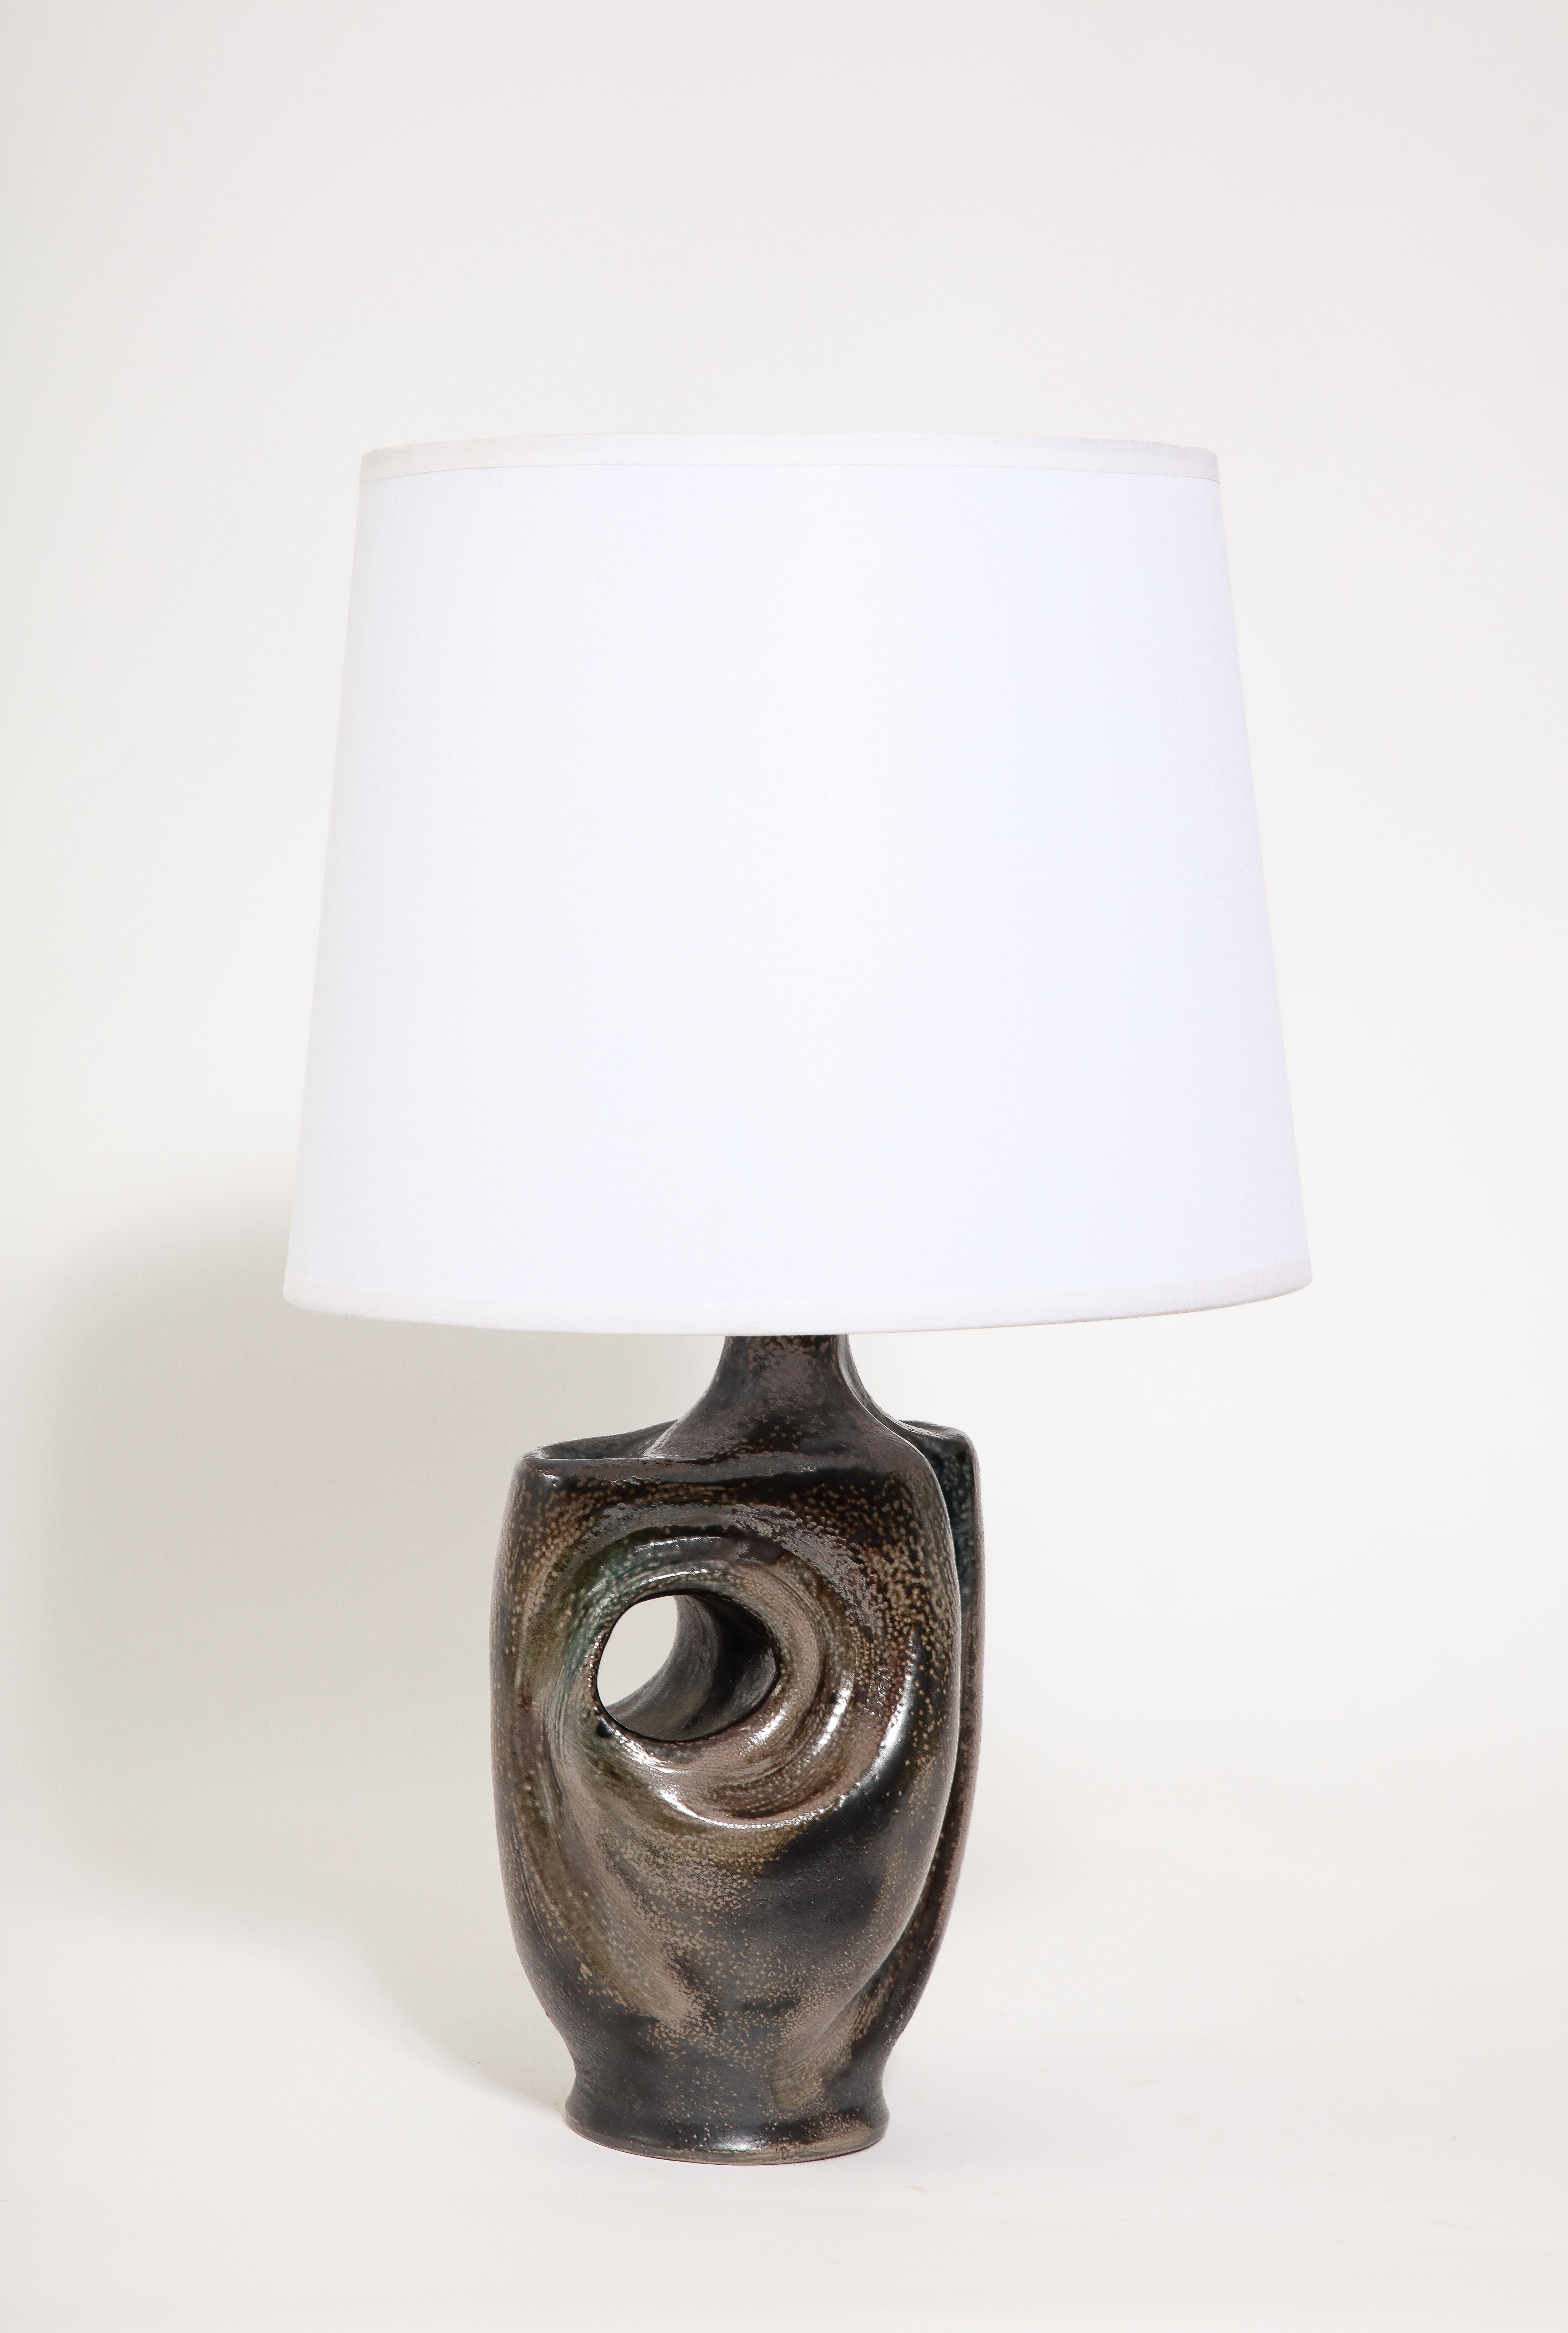 Large Curved Ceramic Lamp in Metallic Glaze, France 1950’s For Sale 2